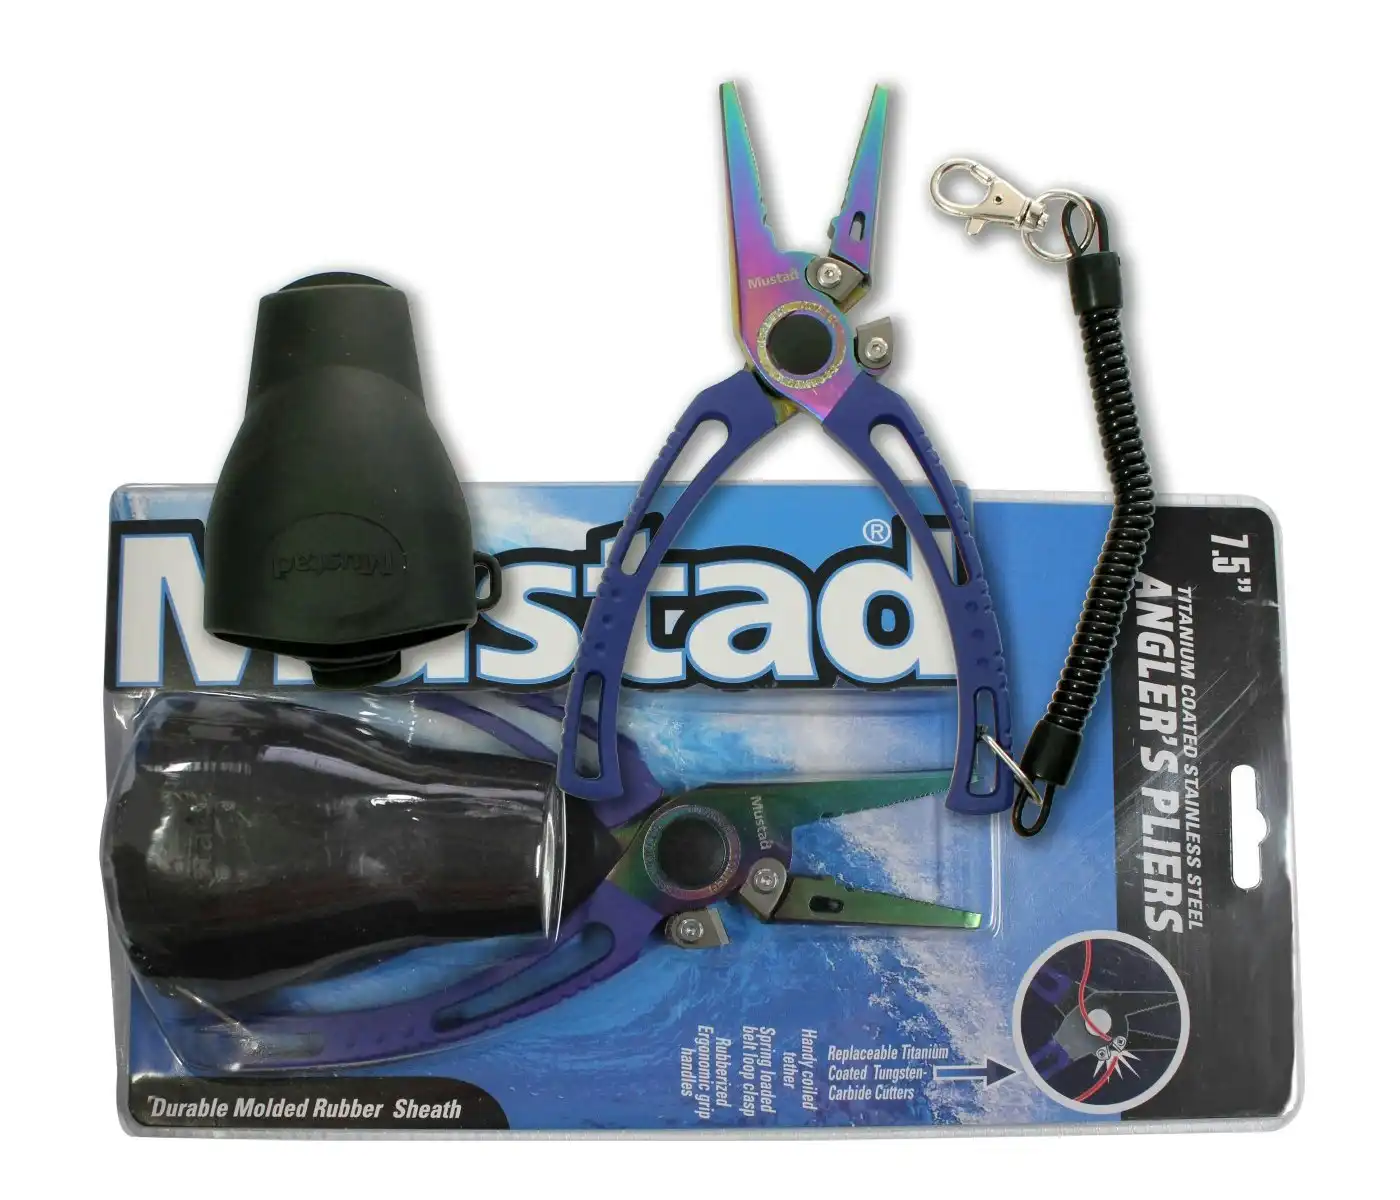 Mustad 7.5 Inch Titanium Coated Stainless Steel Fishing Pliers with Rubber Pouch